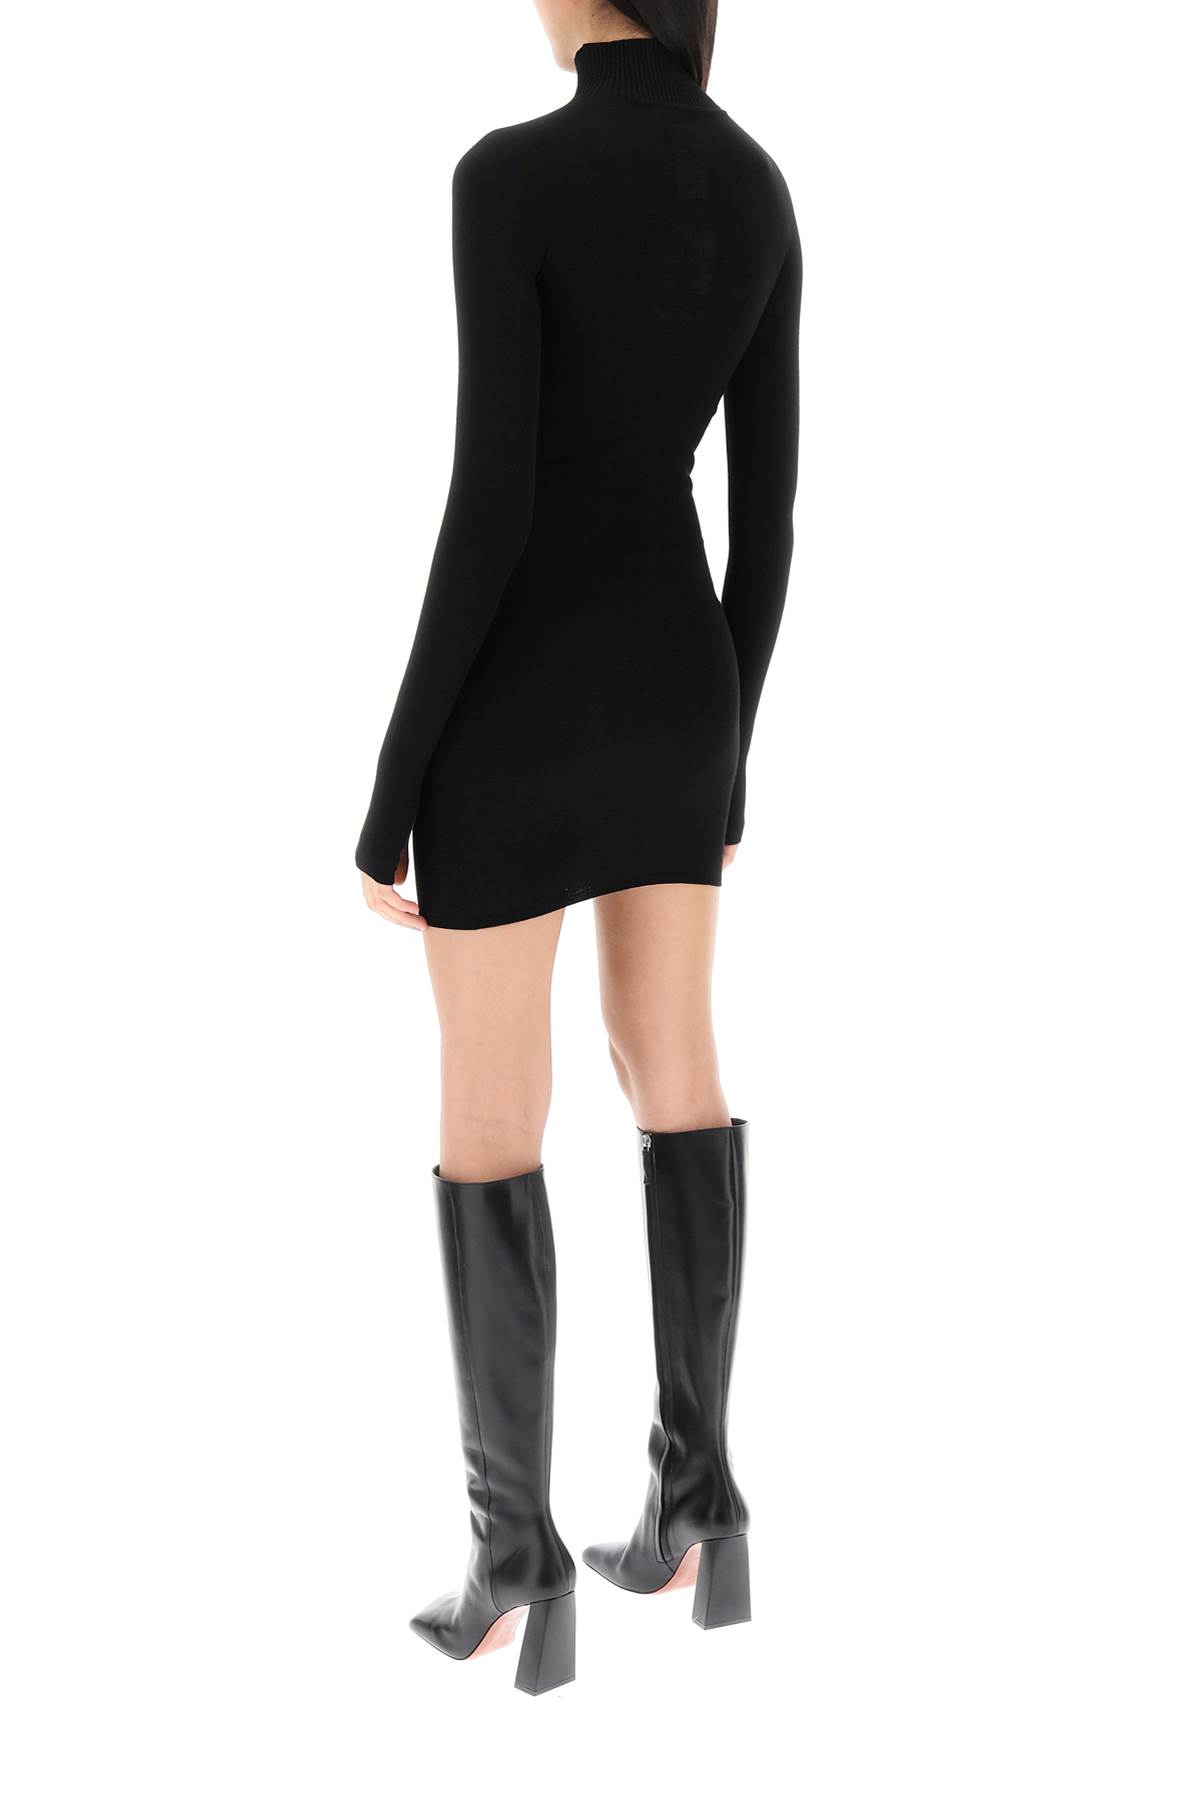 Shop Off-white Knitted Mini Dress With Off Logo In Black/white